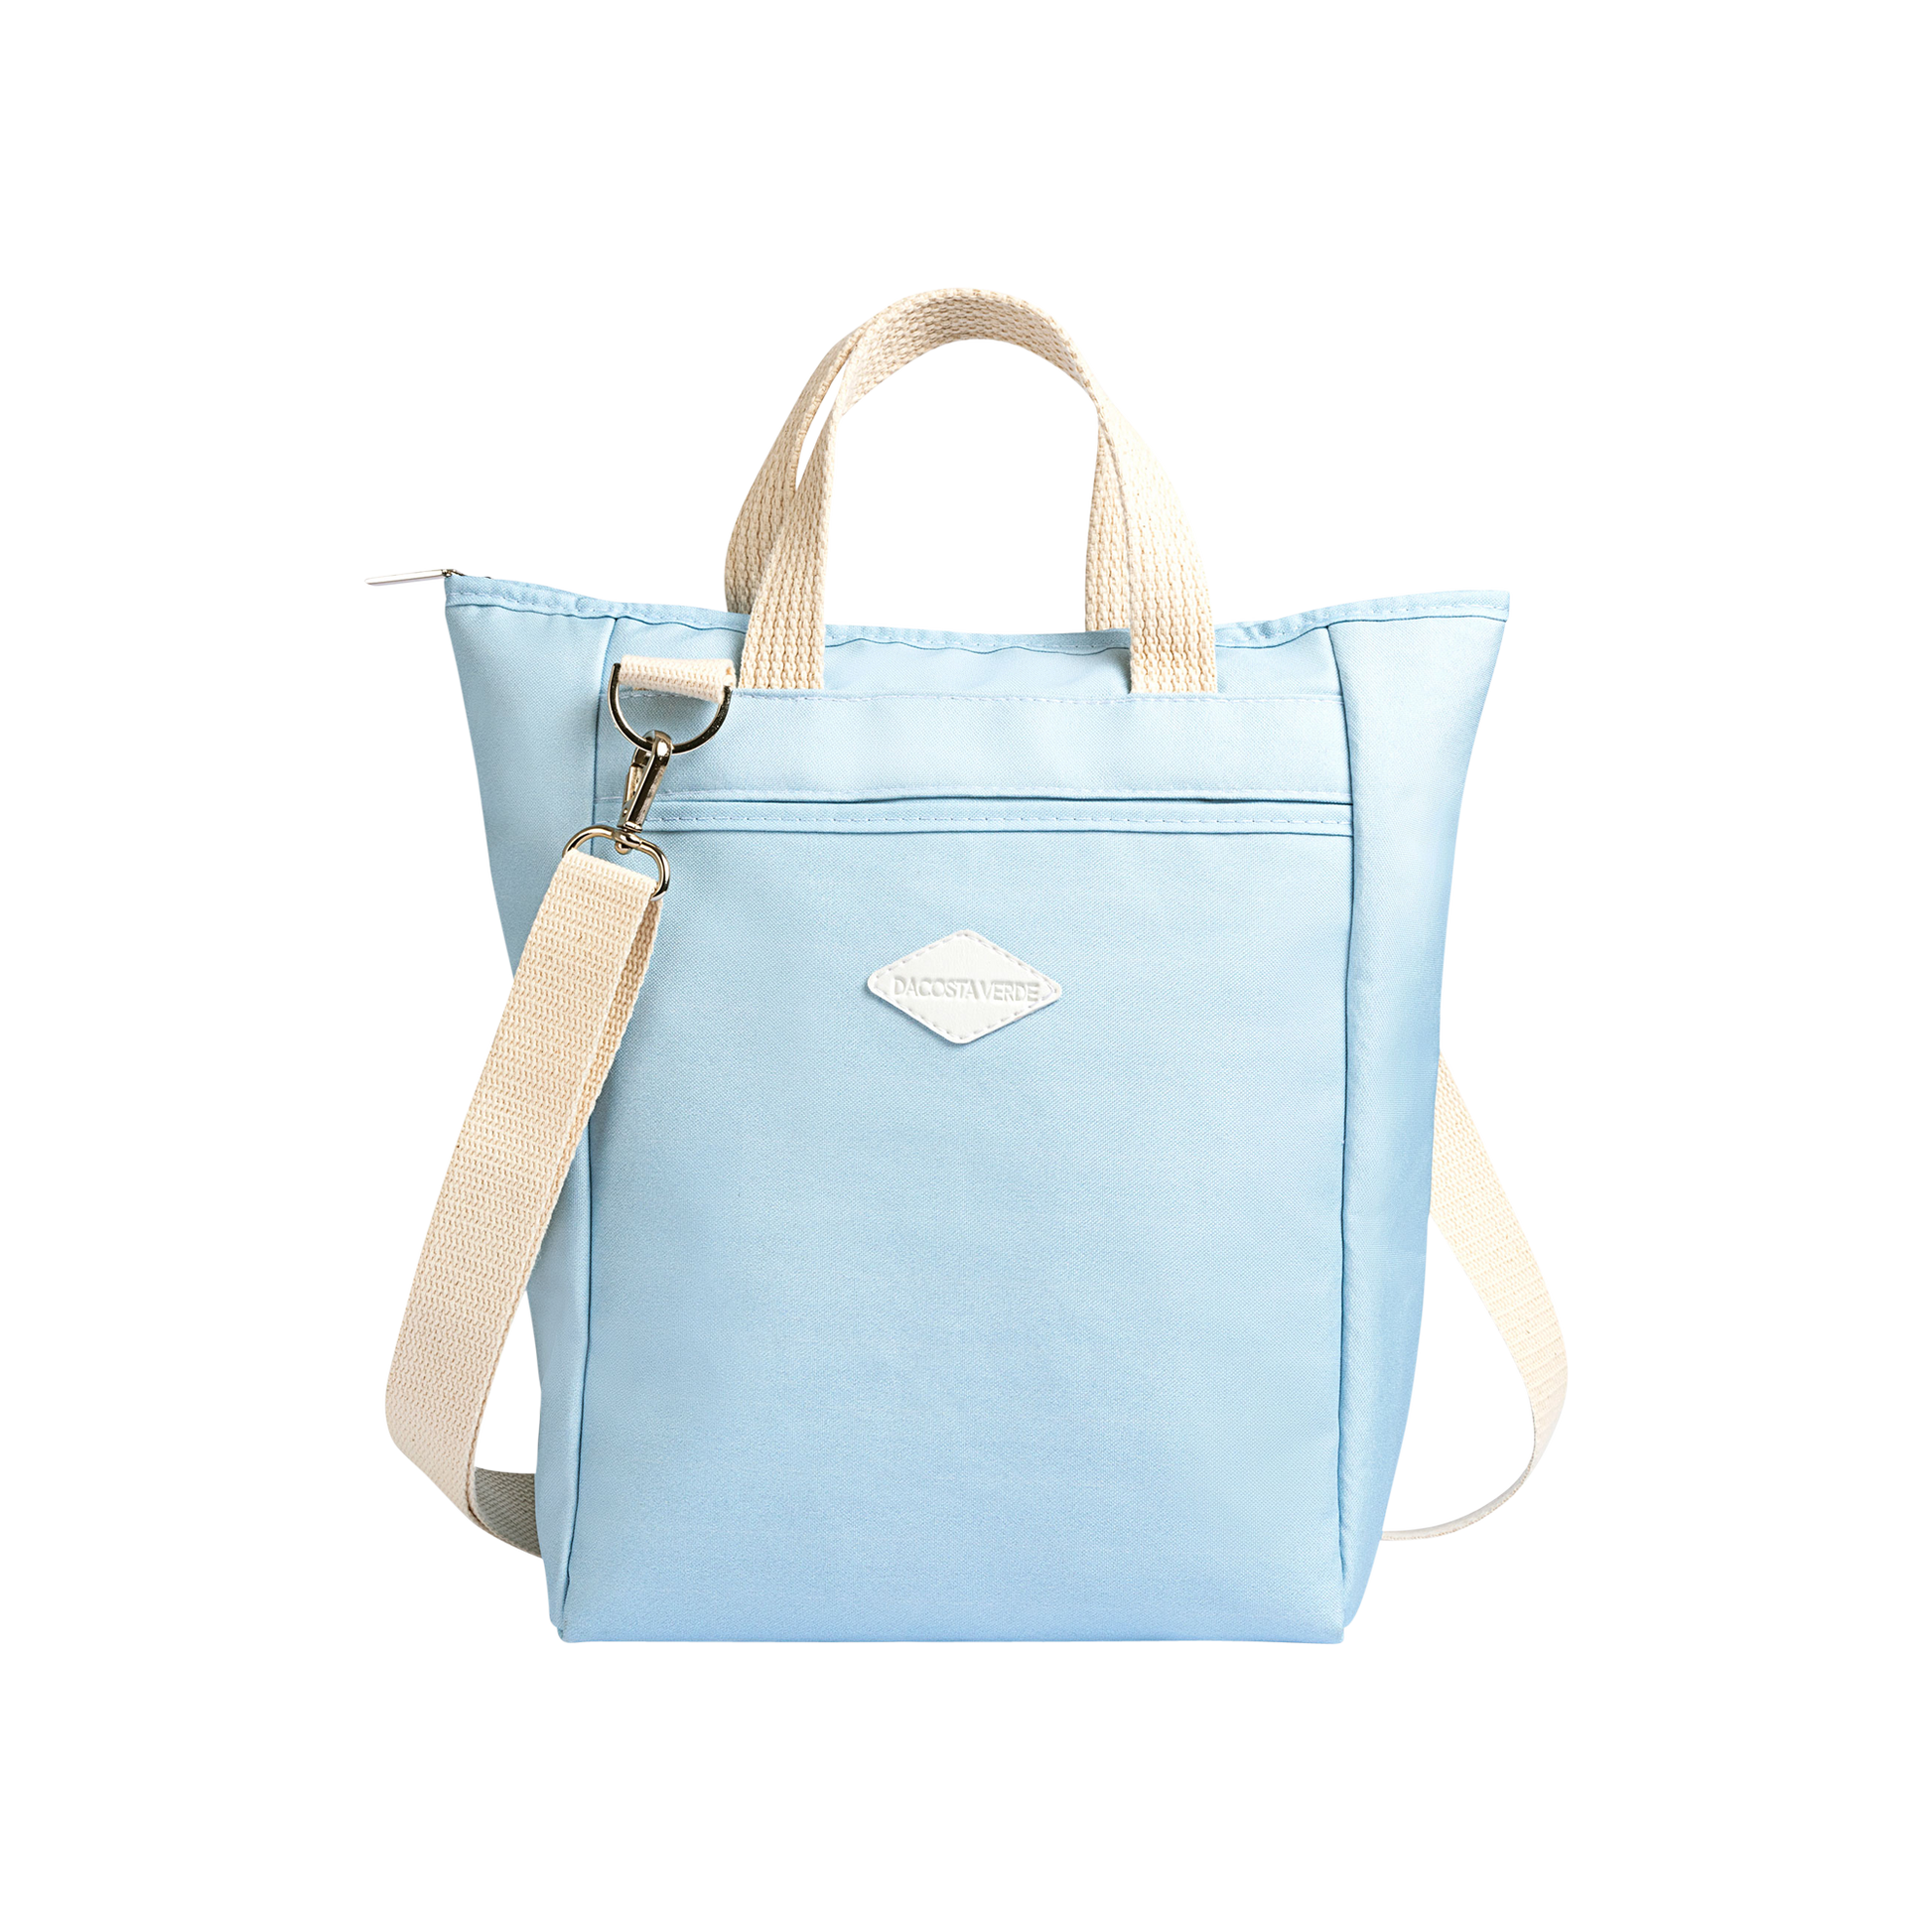 Tote Cooler Endless Blue